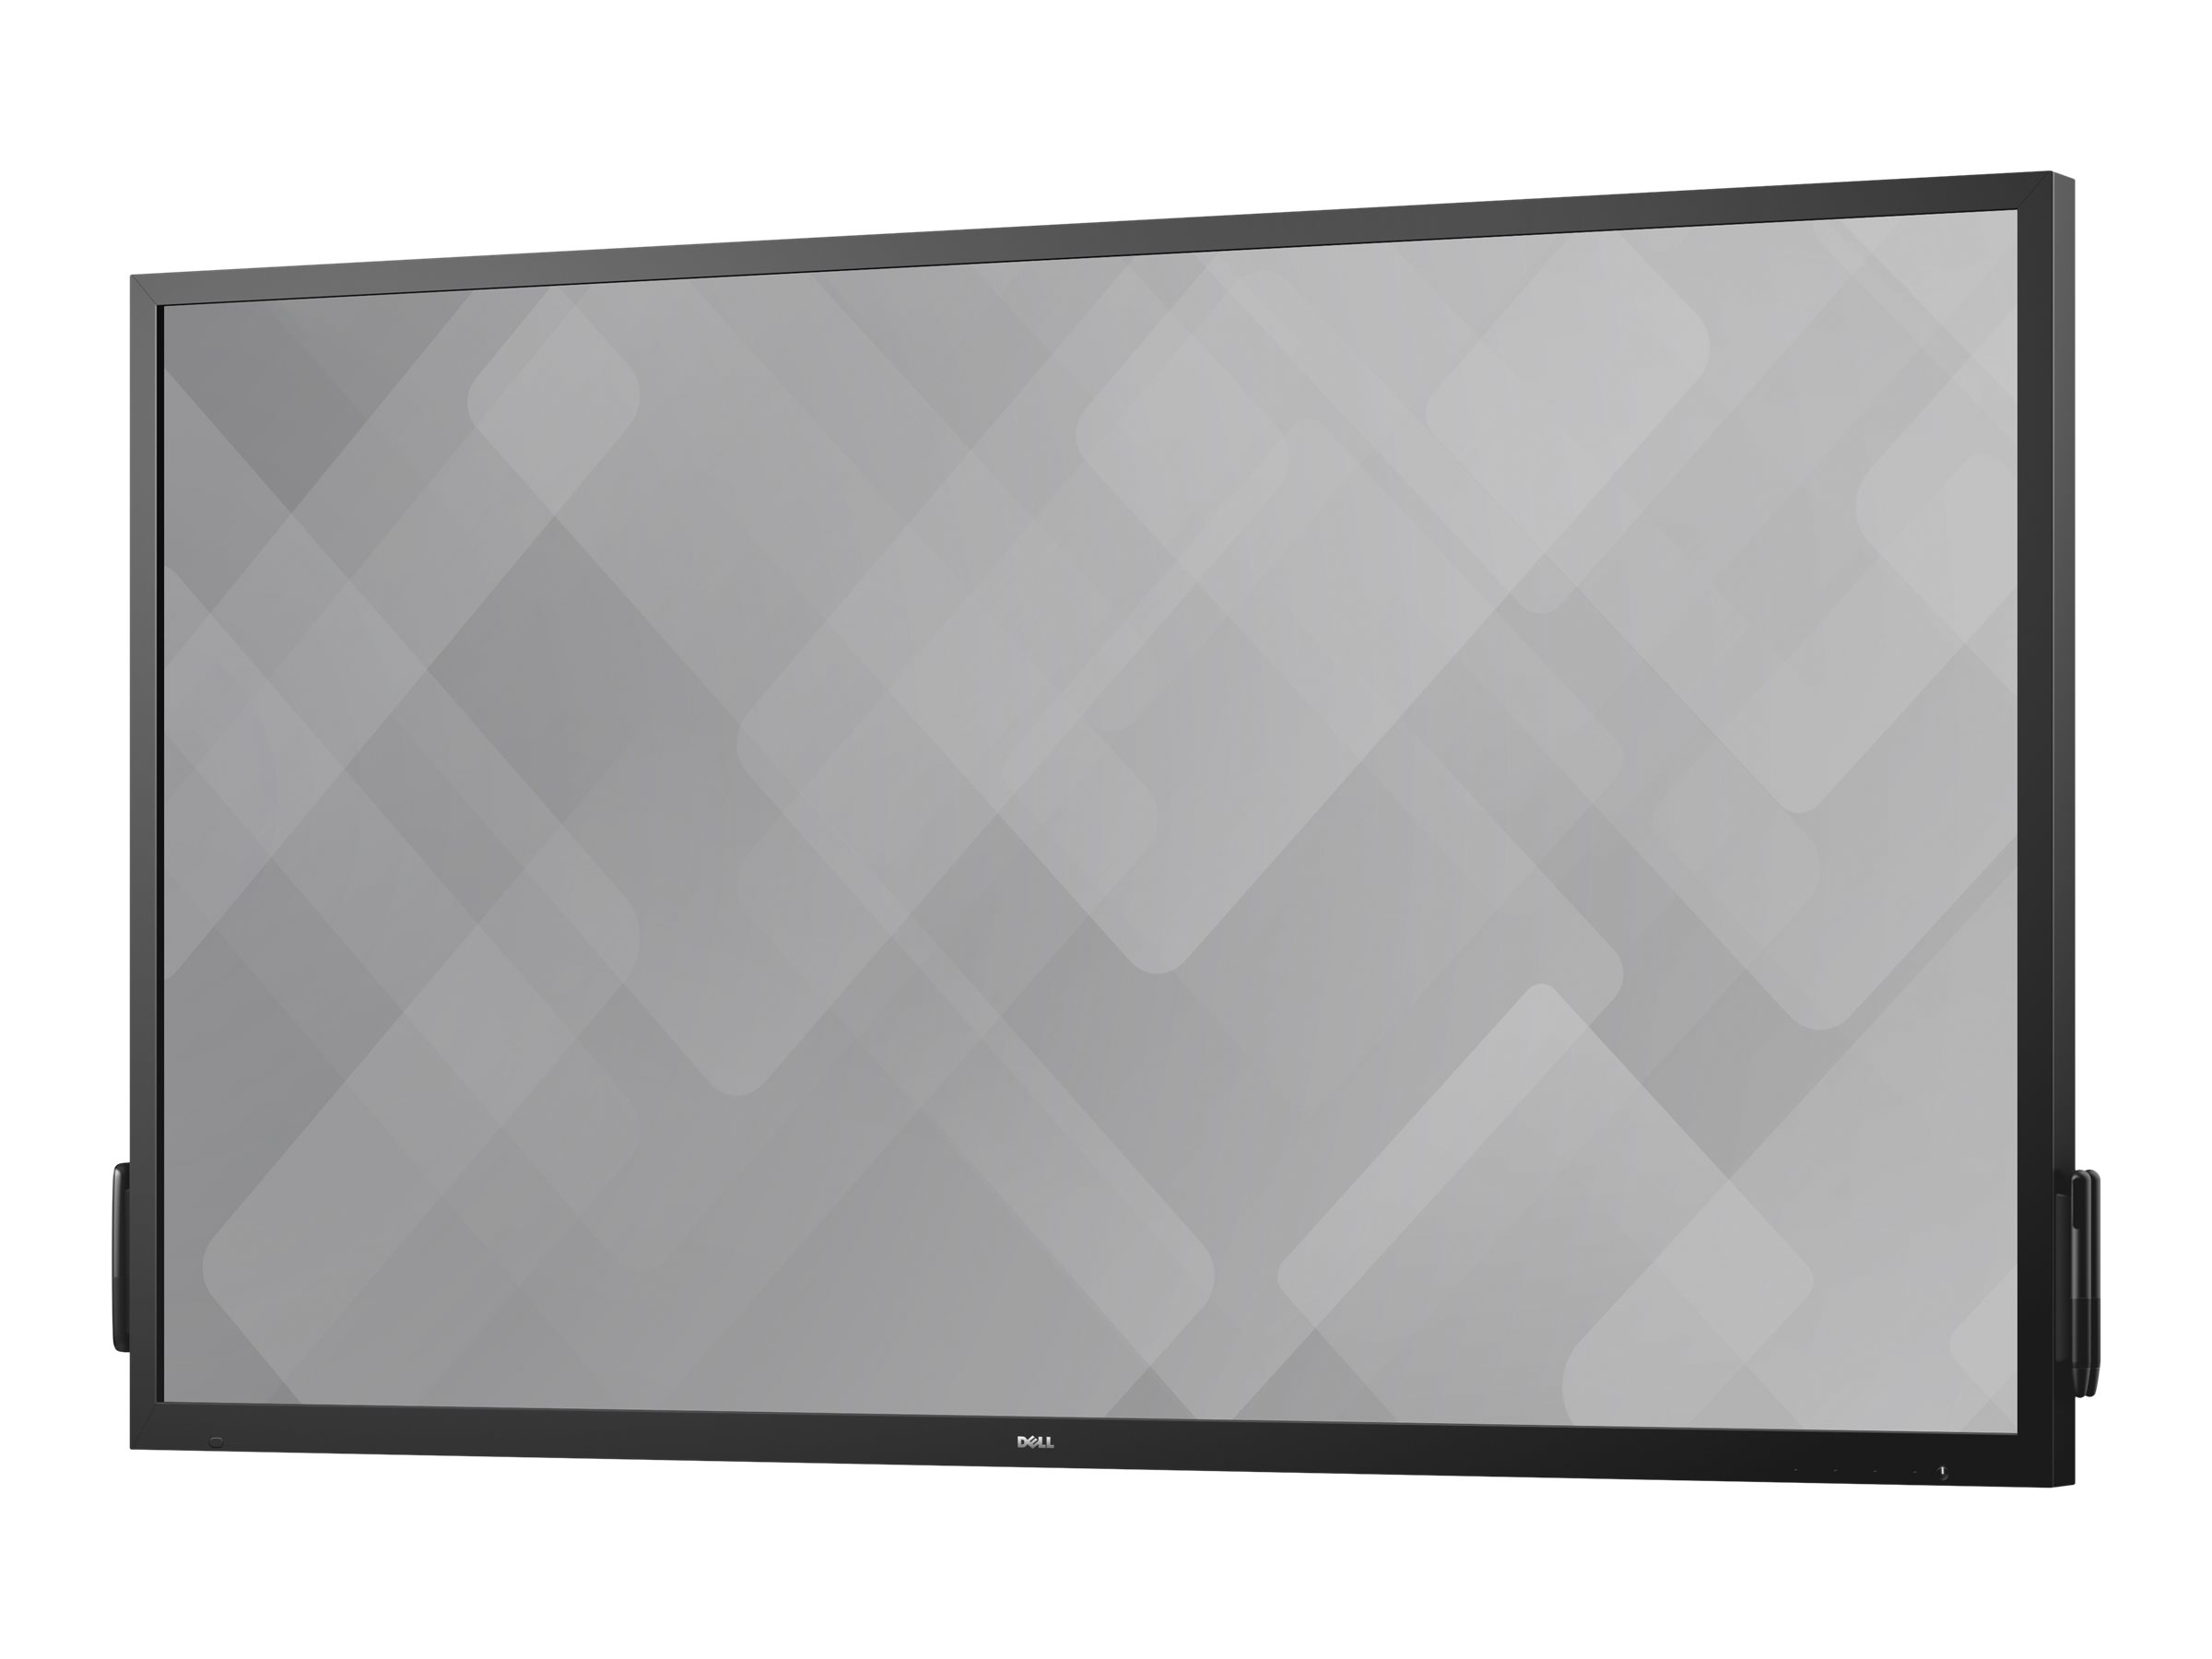 Dell C7017T - 70" Diagonal Class (69.513" viewable) LED display